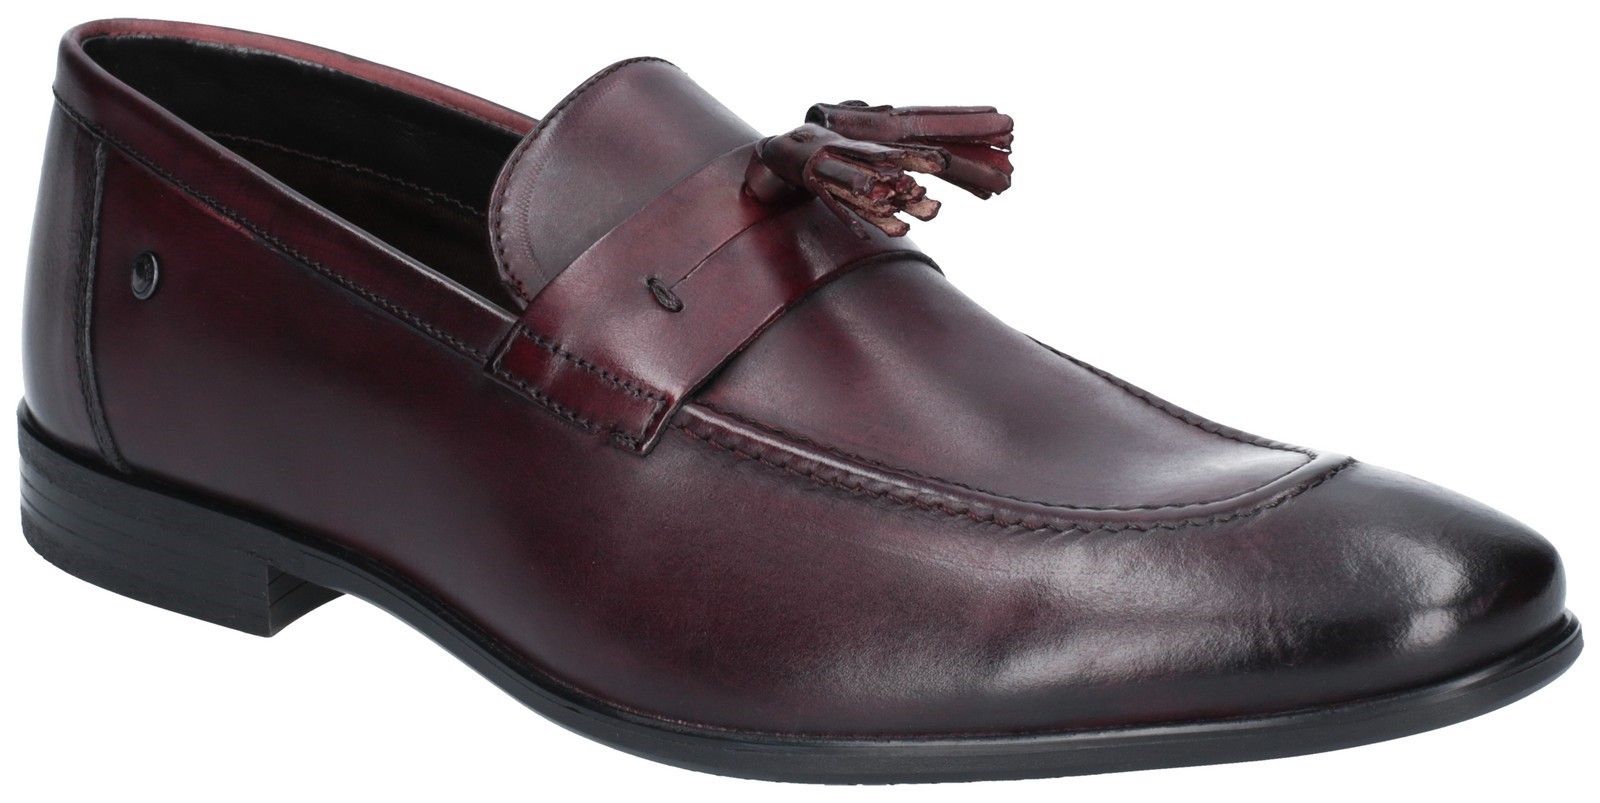 The Ritz Loafer from the Base London Concierge range is a classic slip on. A formal leather shoe providing quality construction with great comfort. The tassel decoration adds extra flair to your look, stating that you take your style seriously. Formal Styling. 
Tassel Details.